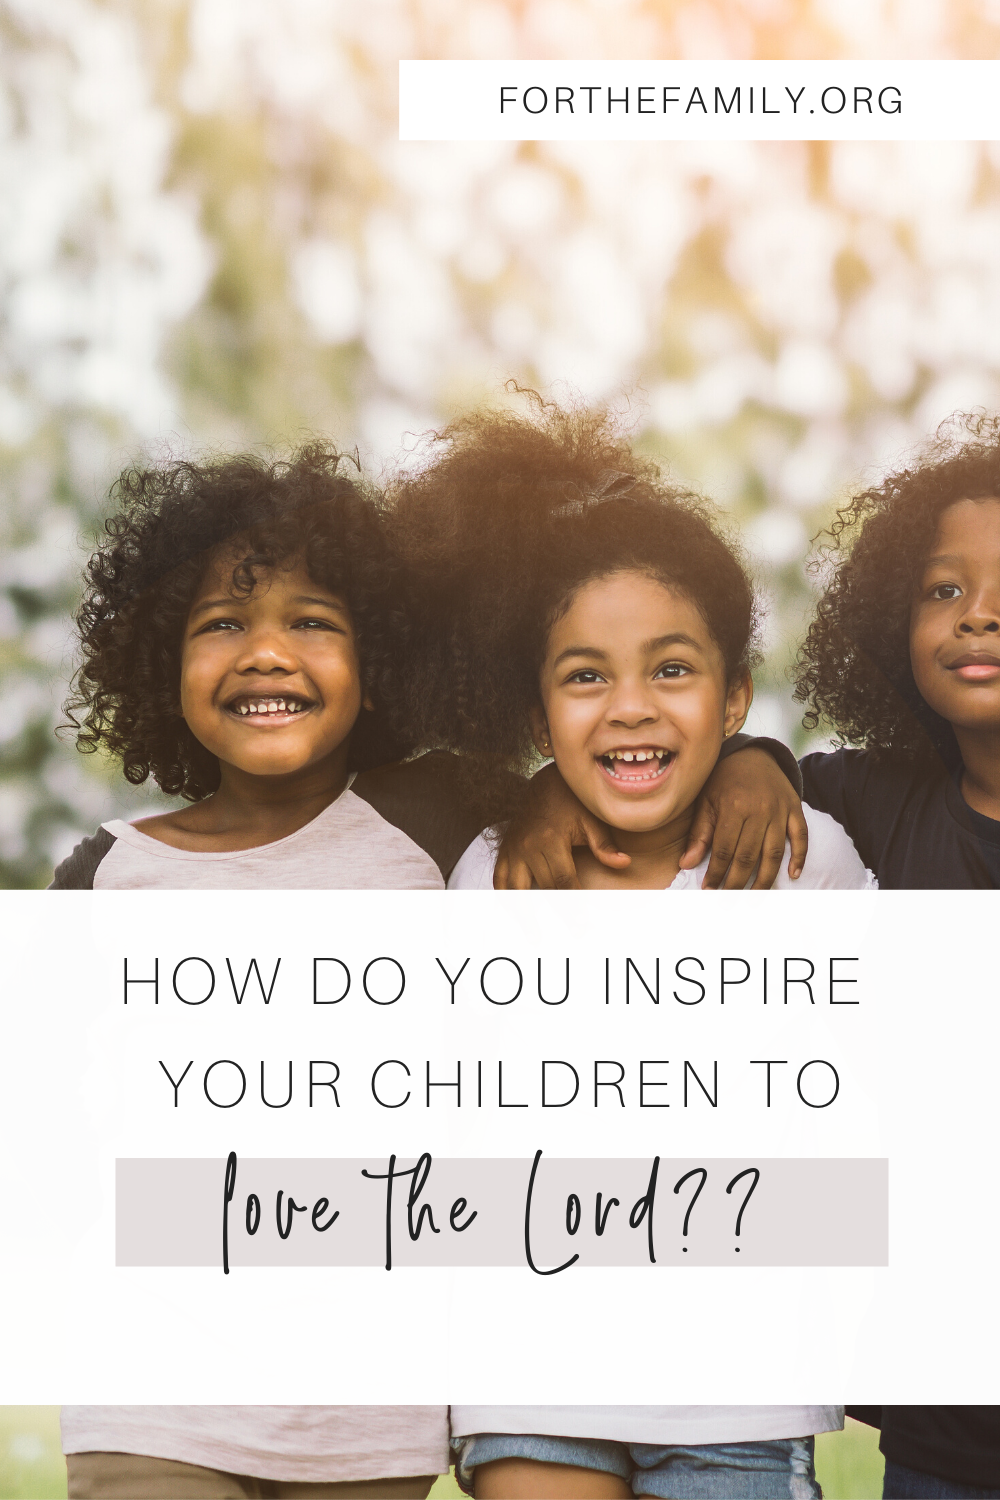 What is the secret to raising children who actually grow up to love the Lord? Maybe you've wondered that yourself. Today, we are sharing some simple ways we've seen the Lord work in our family and pray they are helpful to you...